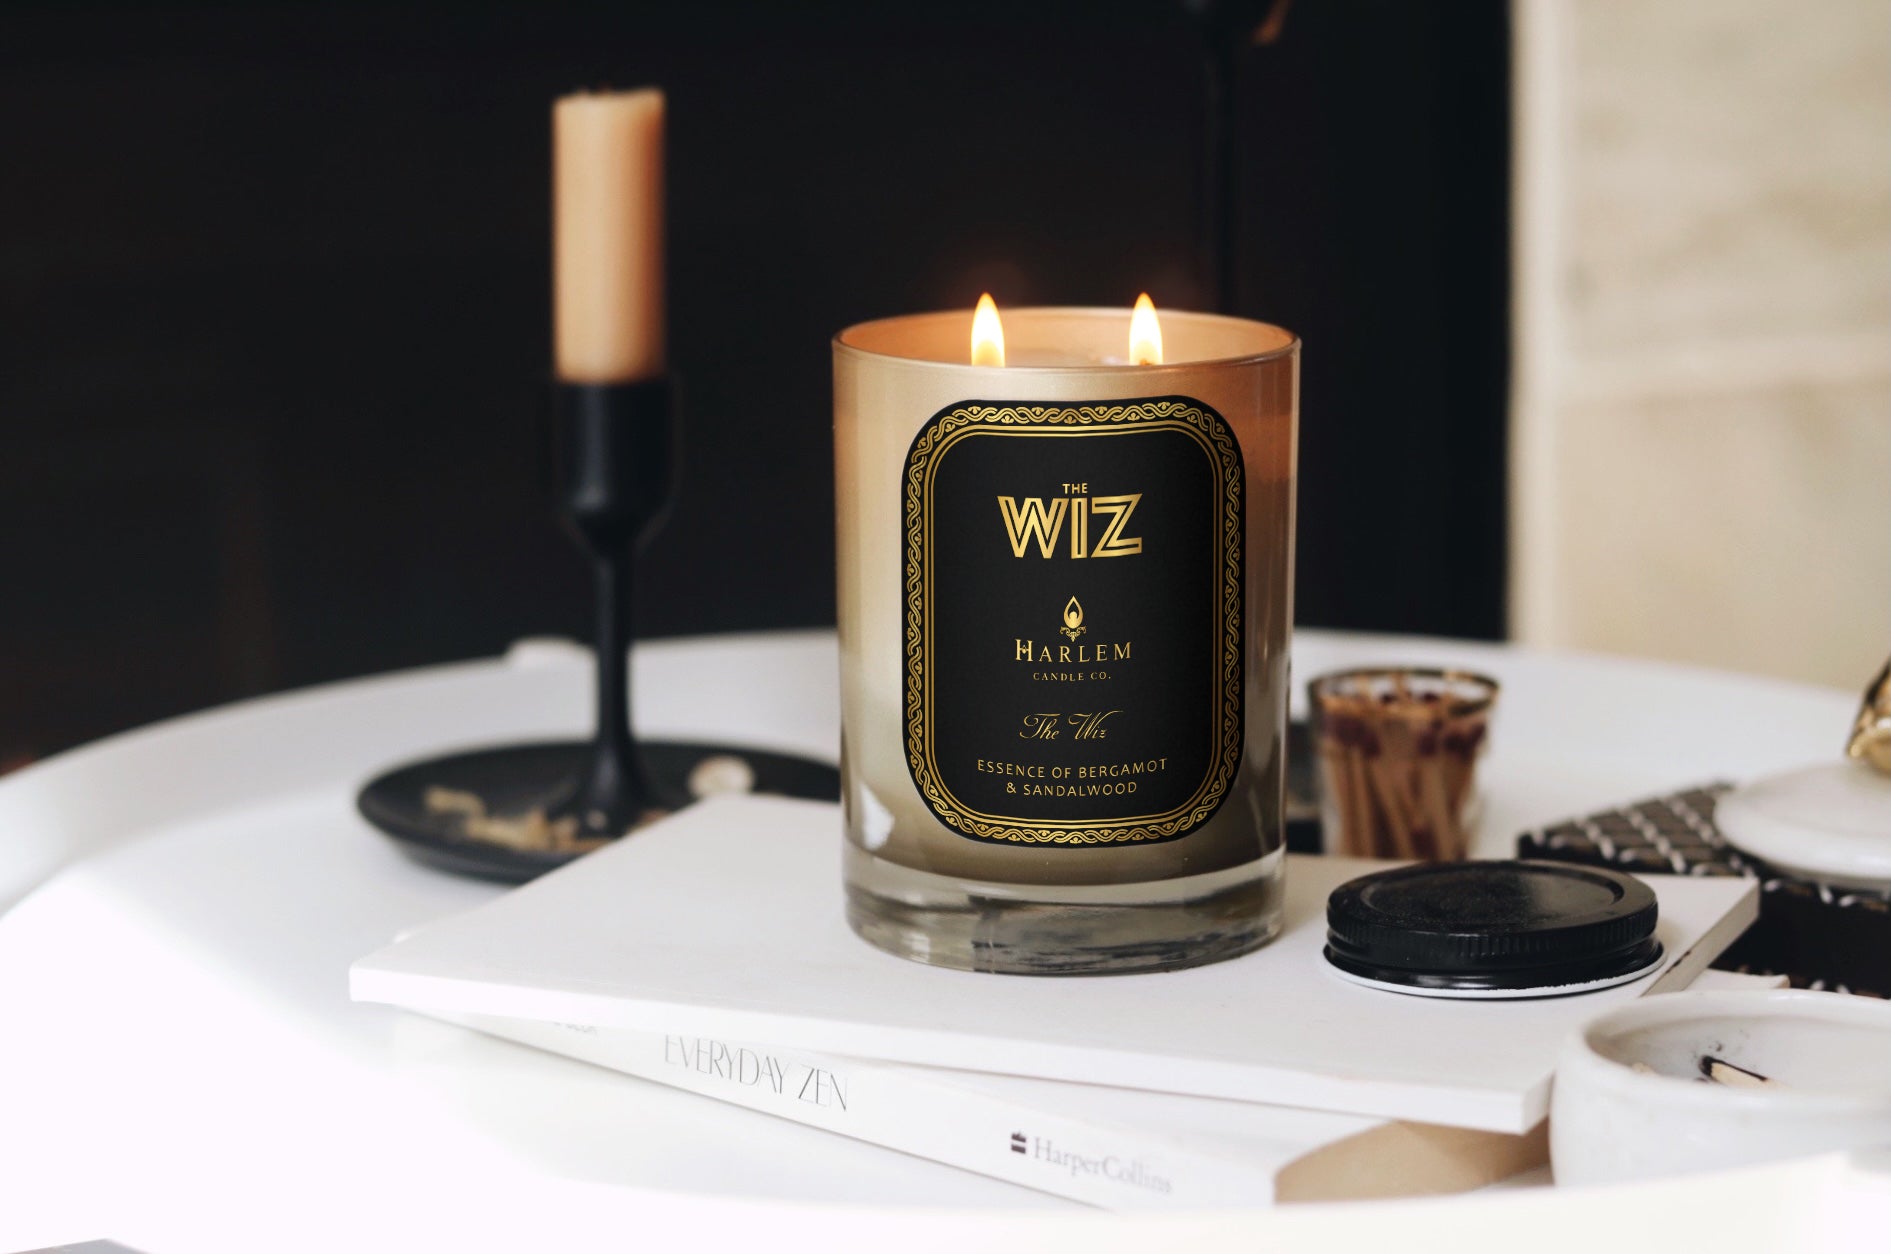 This is an image of the wiz candle in a lifestyle setting. It is pictured next to a gold and black taper candle with matches and books surrounding it.